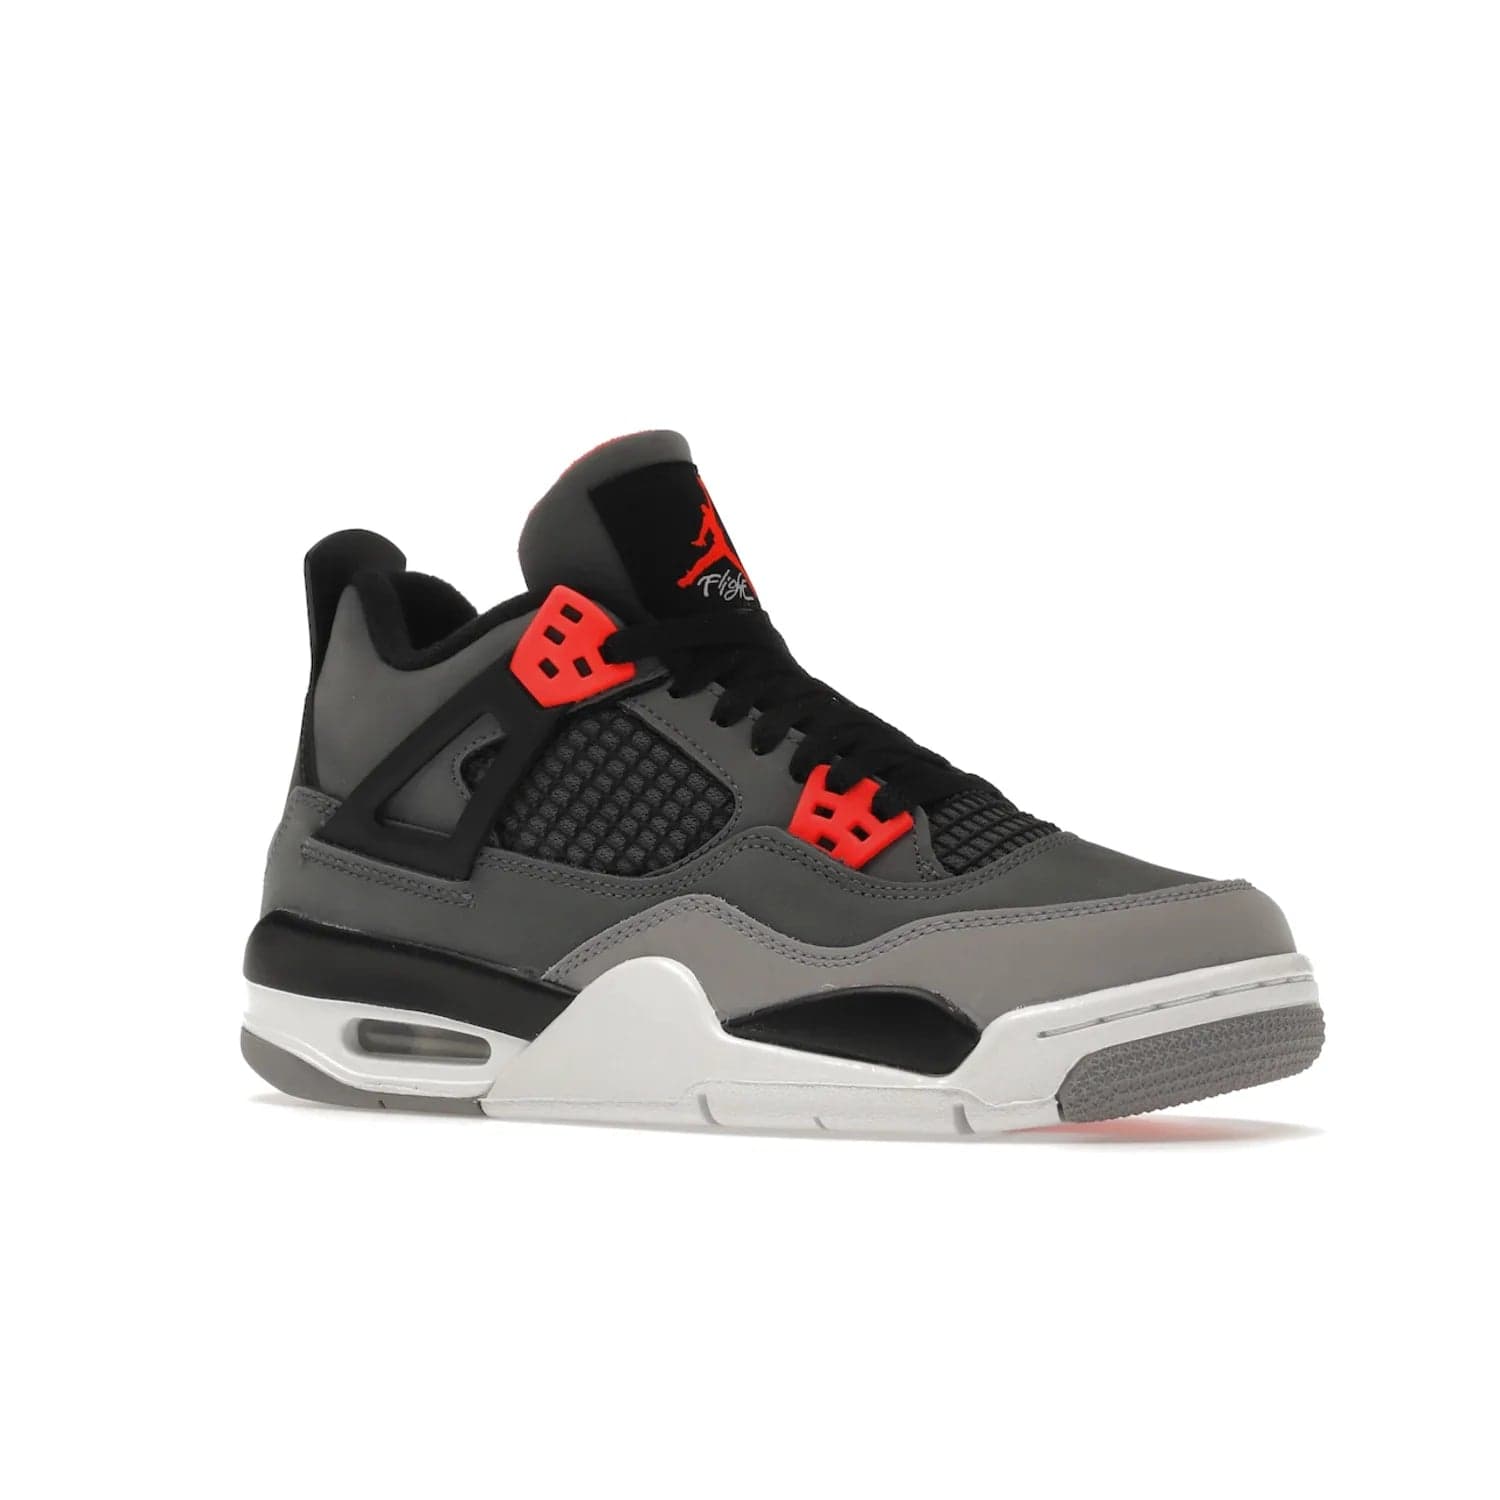 Jordan 4 Retro Infrared (GS) - Image 4 - Only at www.BallersClubKickz.com - Shop the Air Jordan 4 Retro Infrared (GS) for a classic silhouette with subtle yet bold features. Dark grey nubuck upper with lighter forefoot overlay, black accents, Infrared molded eyelets & woven tongue tag. Available June 2022.